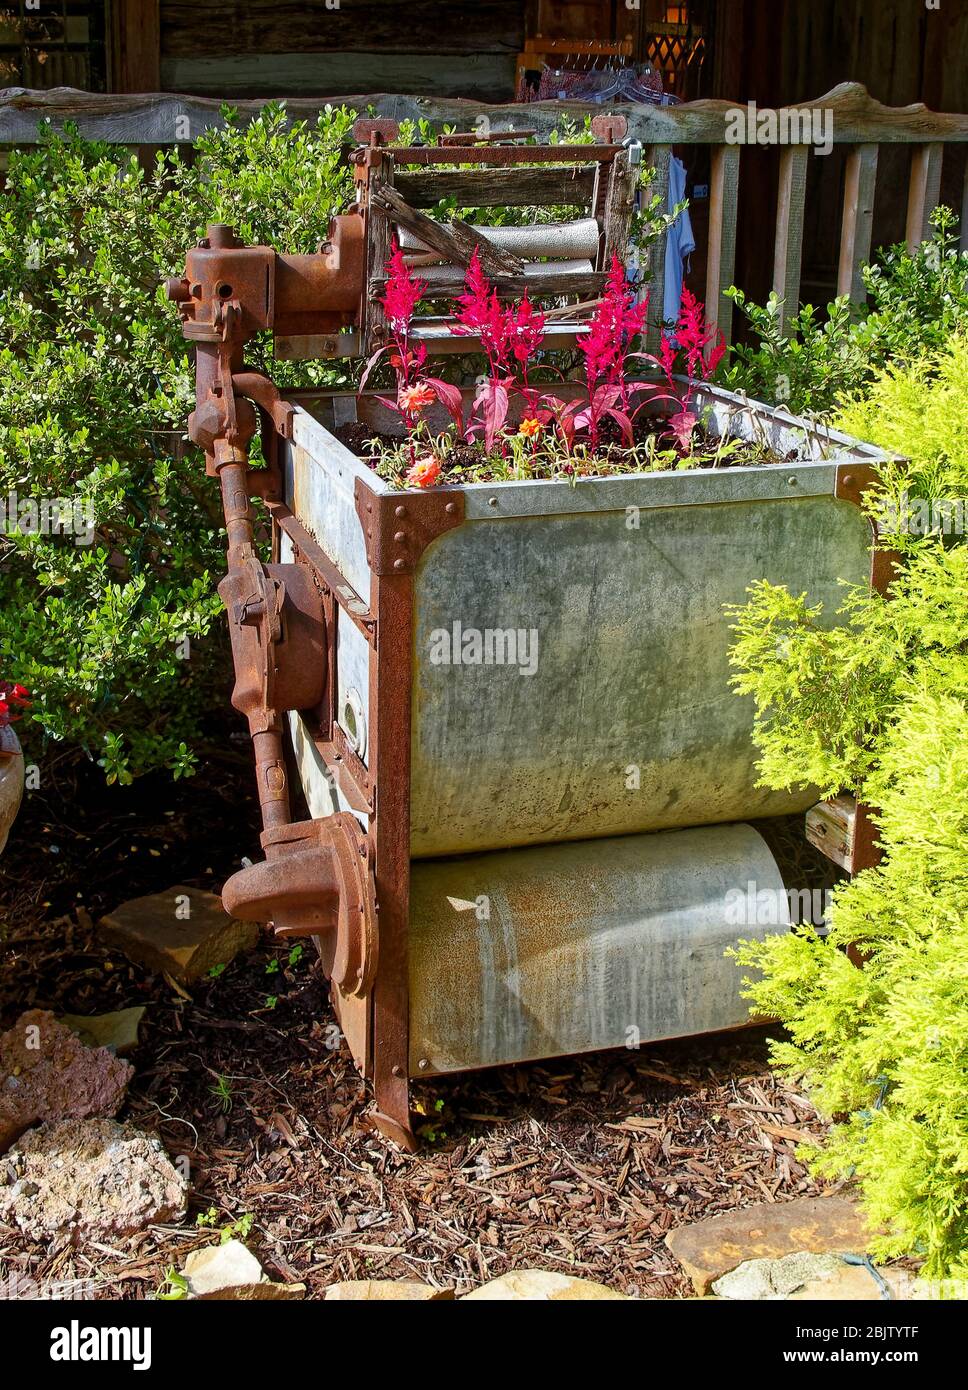 antique ringer washing machine, metal, partly rusted, used as planter, flowers, old, garden, USA Stock Photo